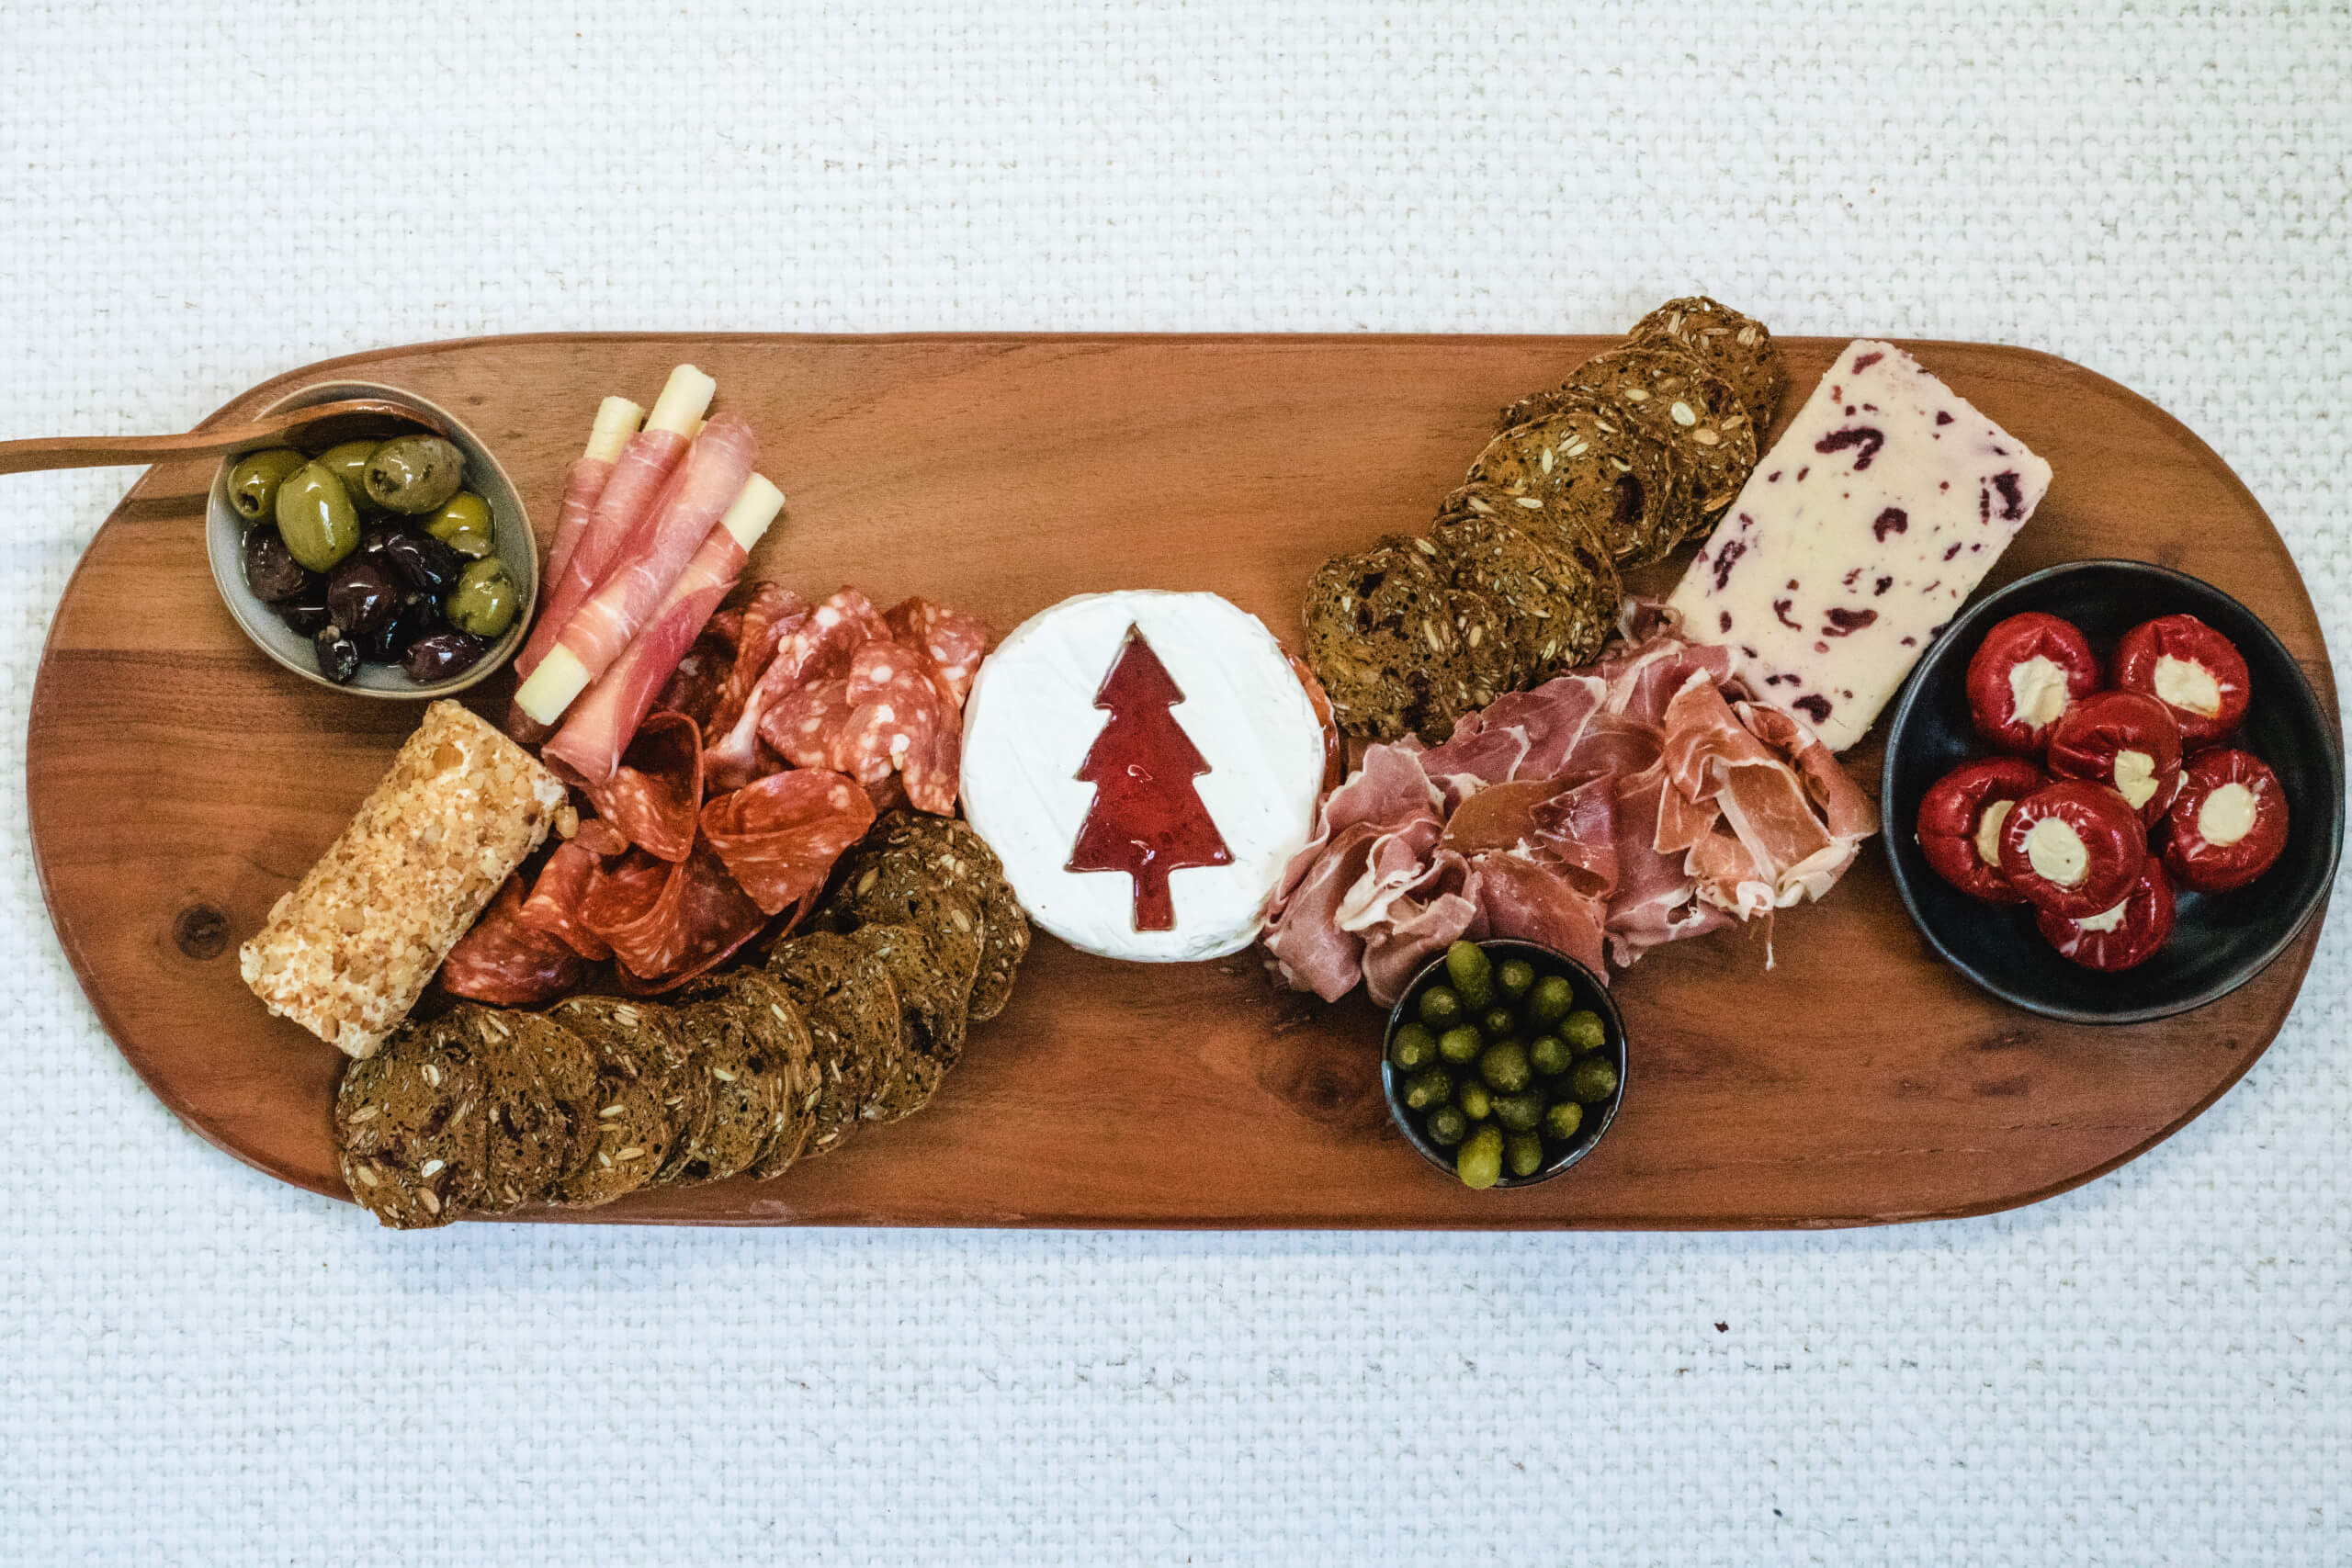 Charcuterie board with the Brie with a Christmas tree cut into it with strawberry jam filling the Christmas tree, wensleydale cheese and apple and cinnamon cheese placed on the board and a line of crackers from the cheese. Added deli meats, olives in small dishes and stuffed capsicums. 